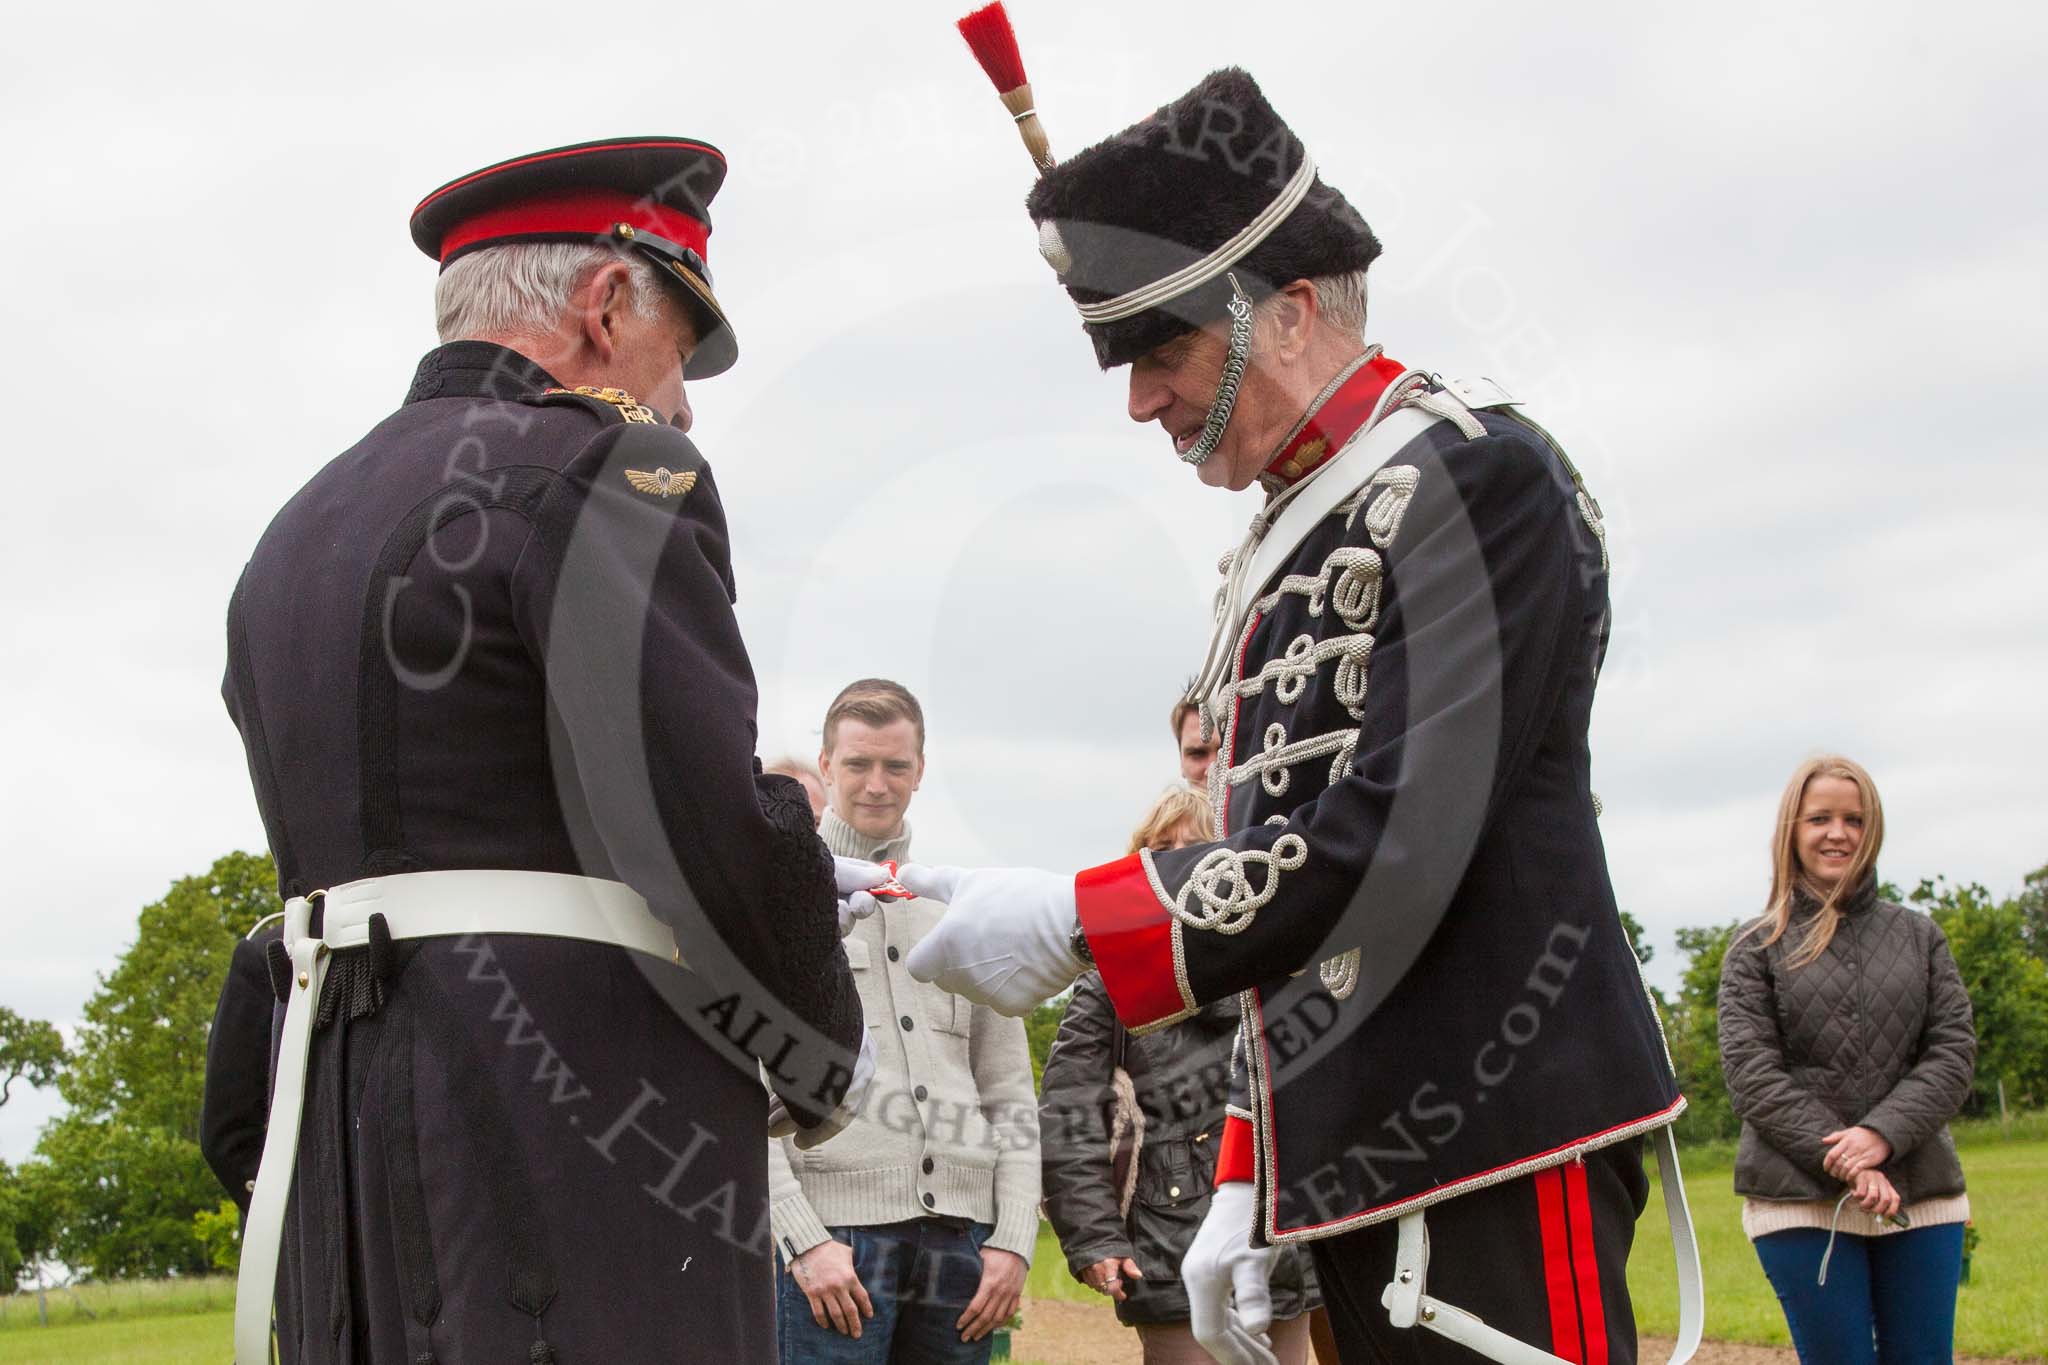 The Light Cavalry HAC Annual Review and Inspection 2013.
Windsor Great Park Review Ground,
Windsor,
Berkshire,
United Kingdom,
on 09 June 2013 at 14:24, image #515